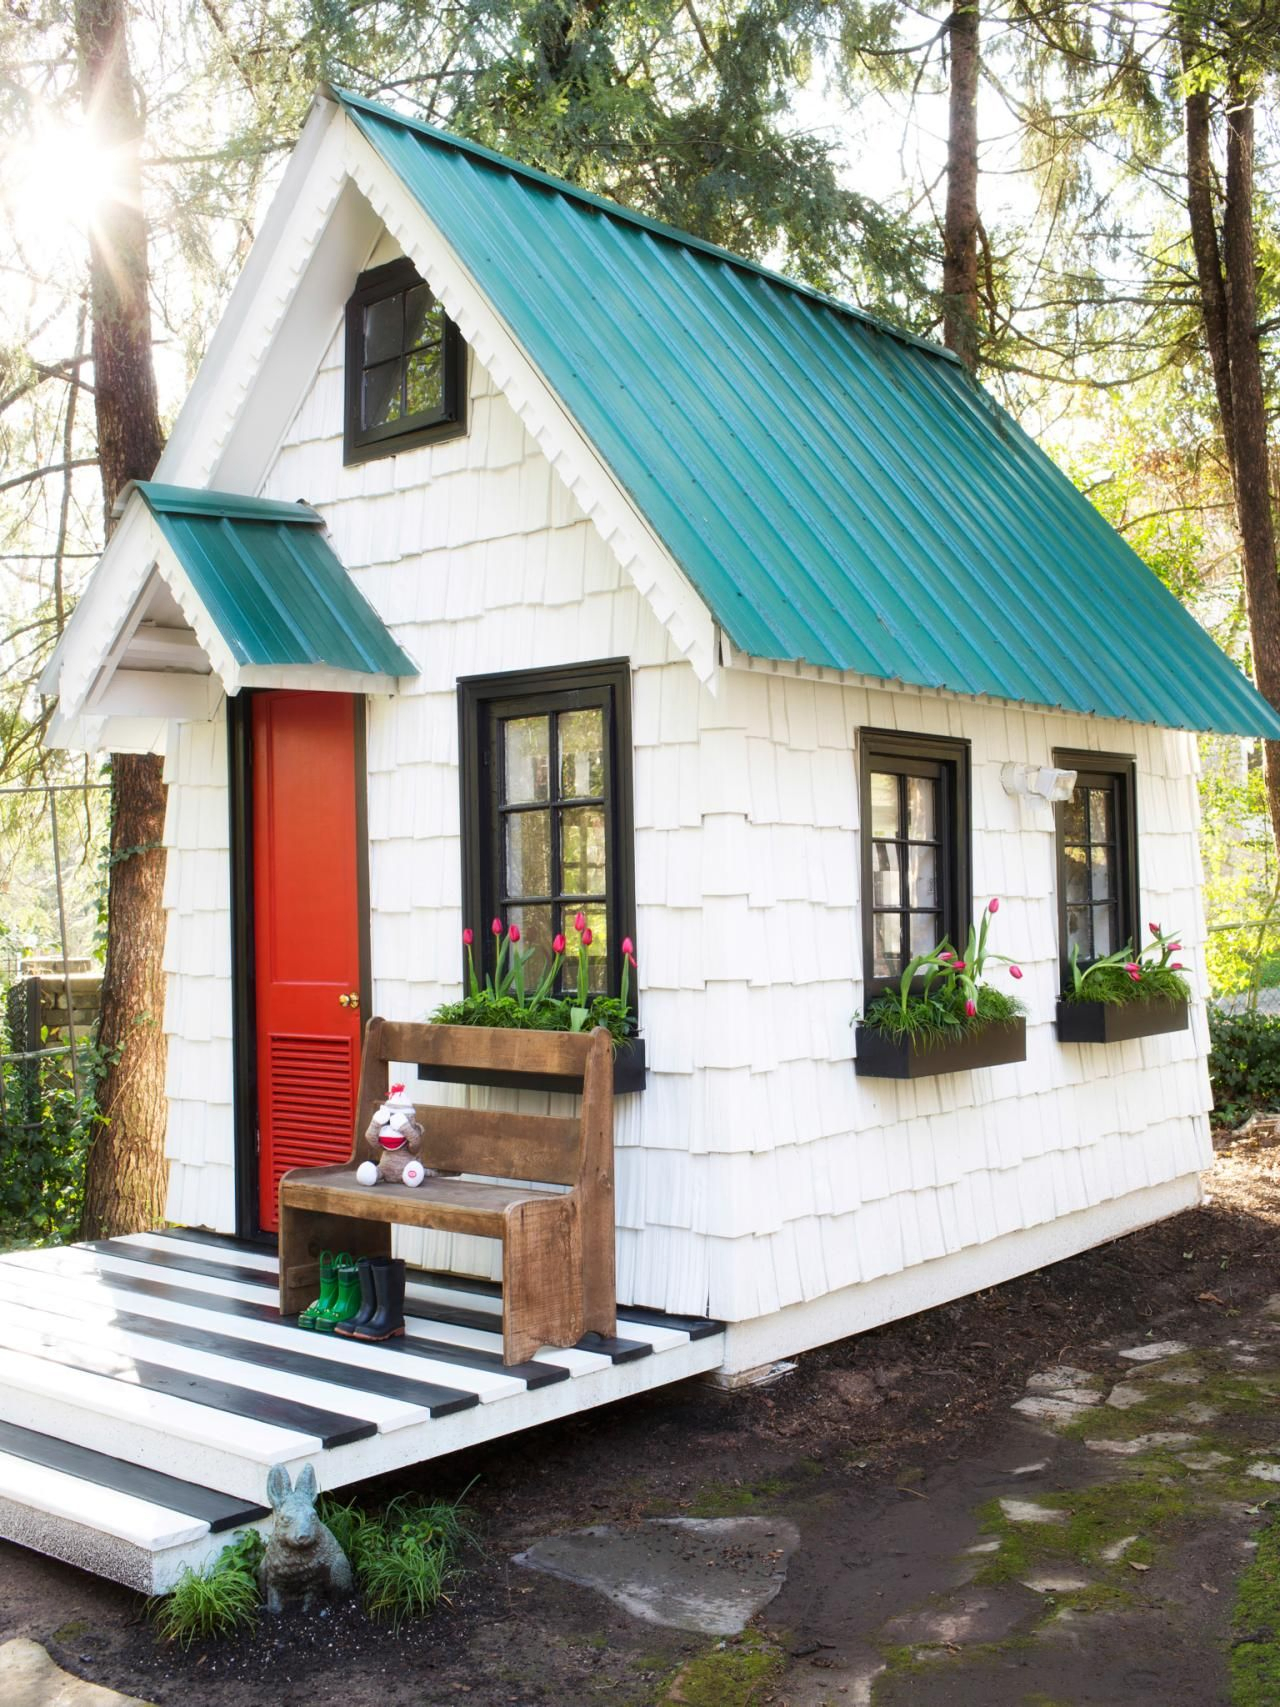 20.SIMPHOME.COM give your backyard an upgrade with these killer shed ideas